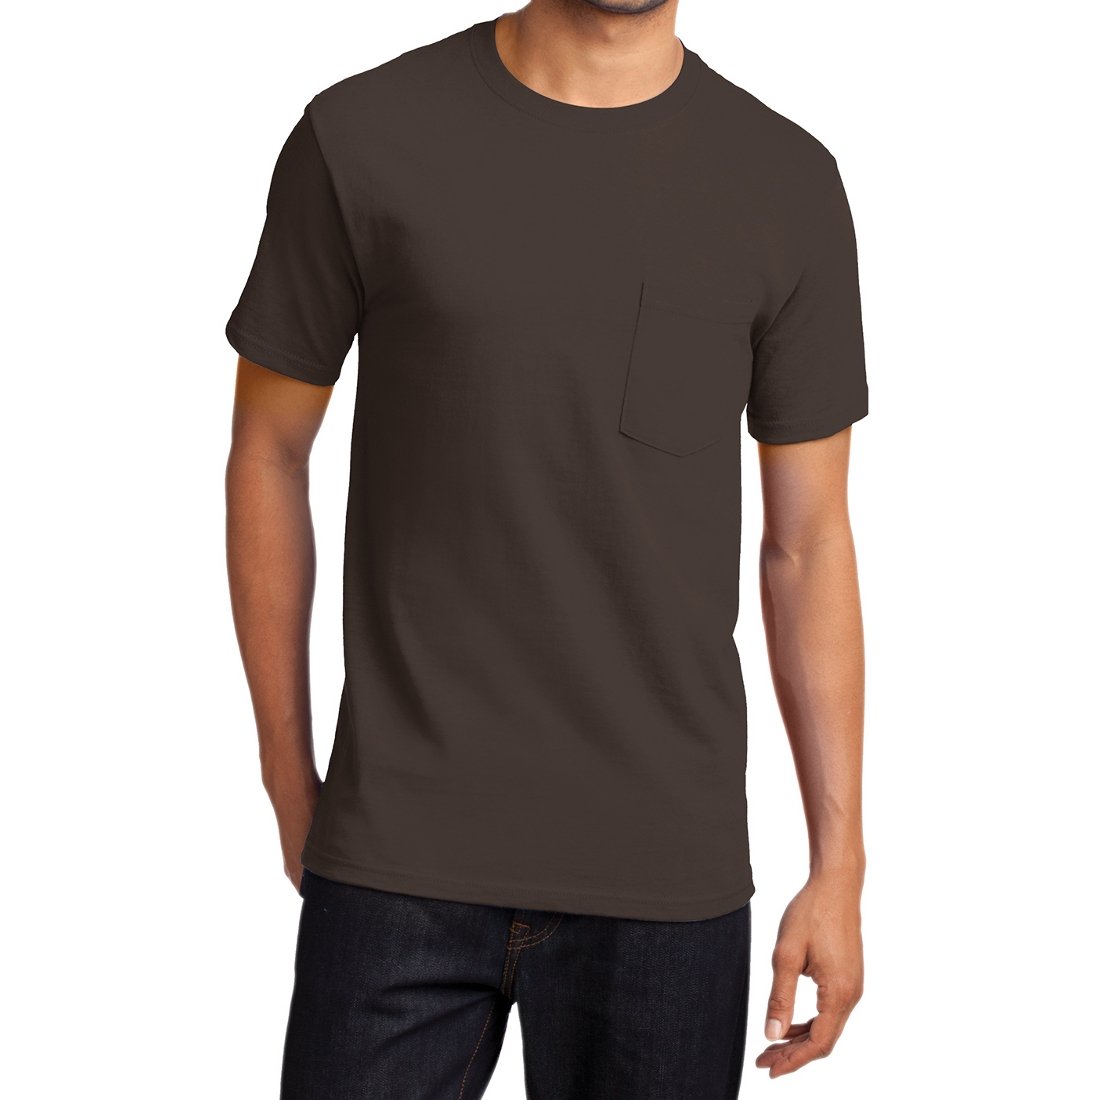 Men's Essential T Shirt with Pocket Brown